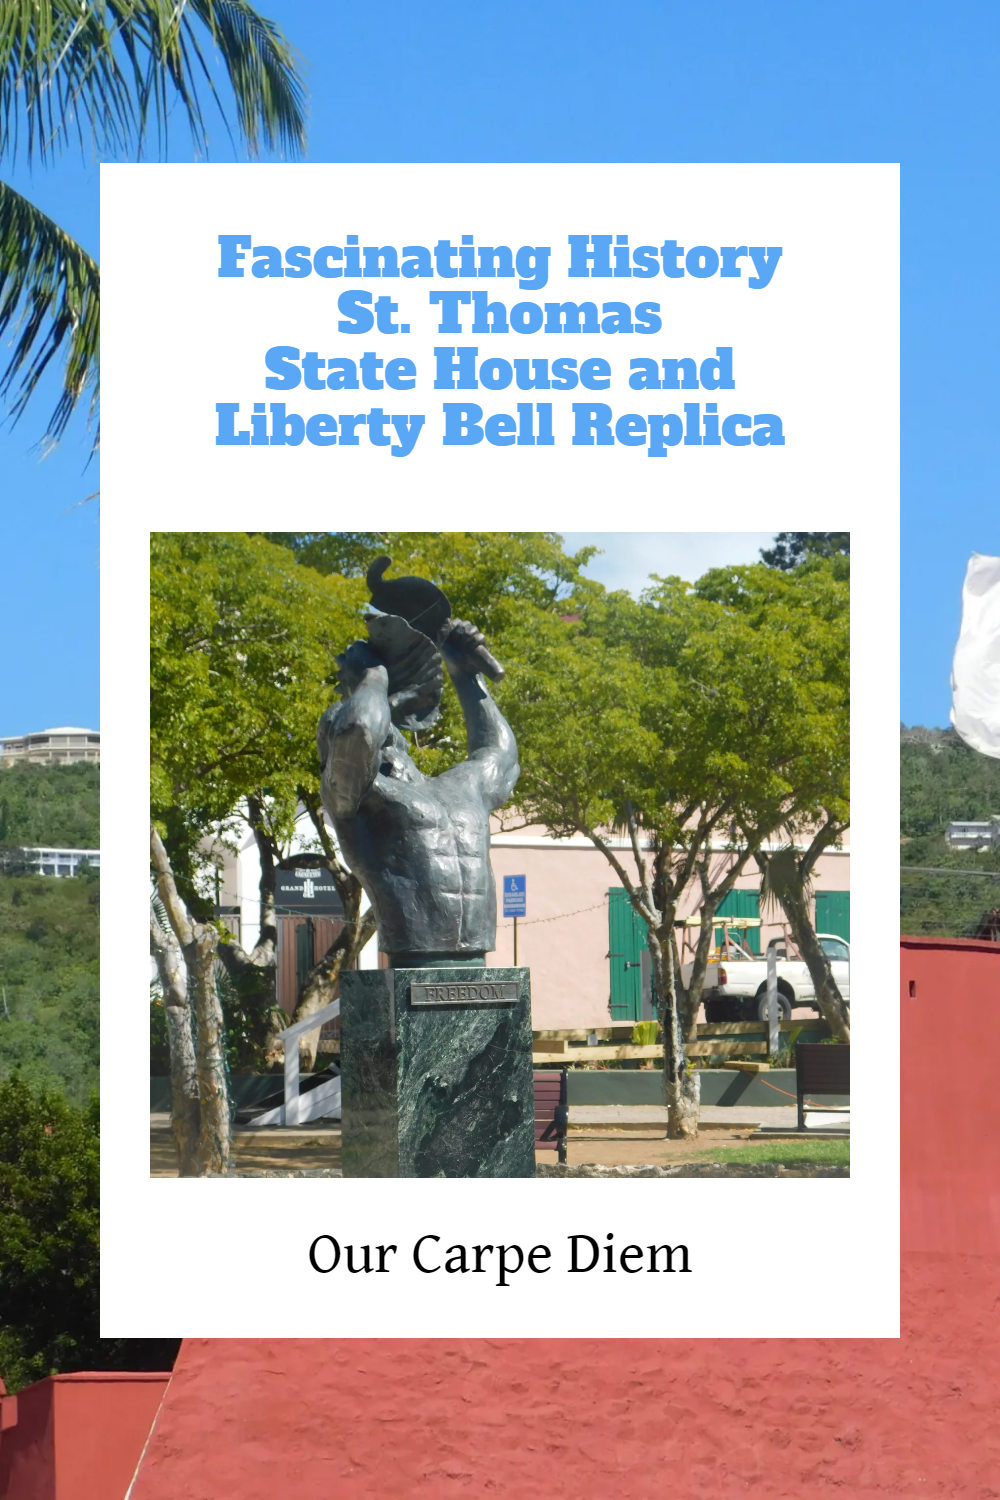 The Fascinating History of St. Thomas Capitol Building and Its Liberty Bell Replica